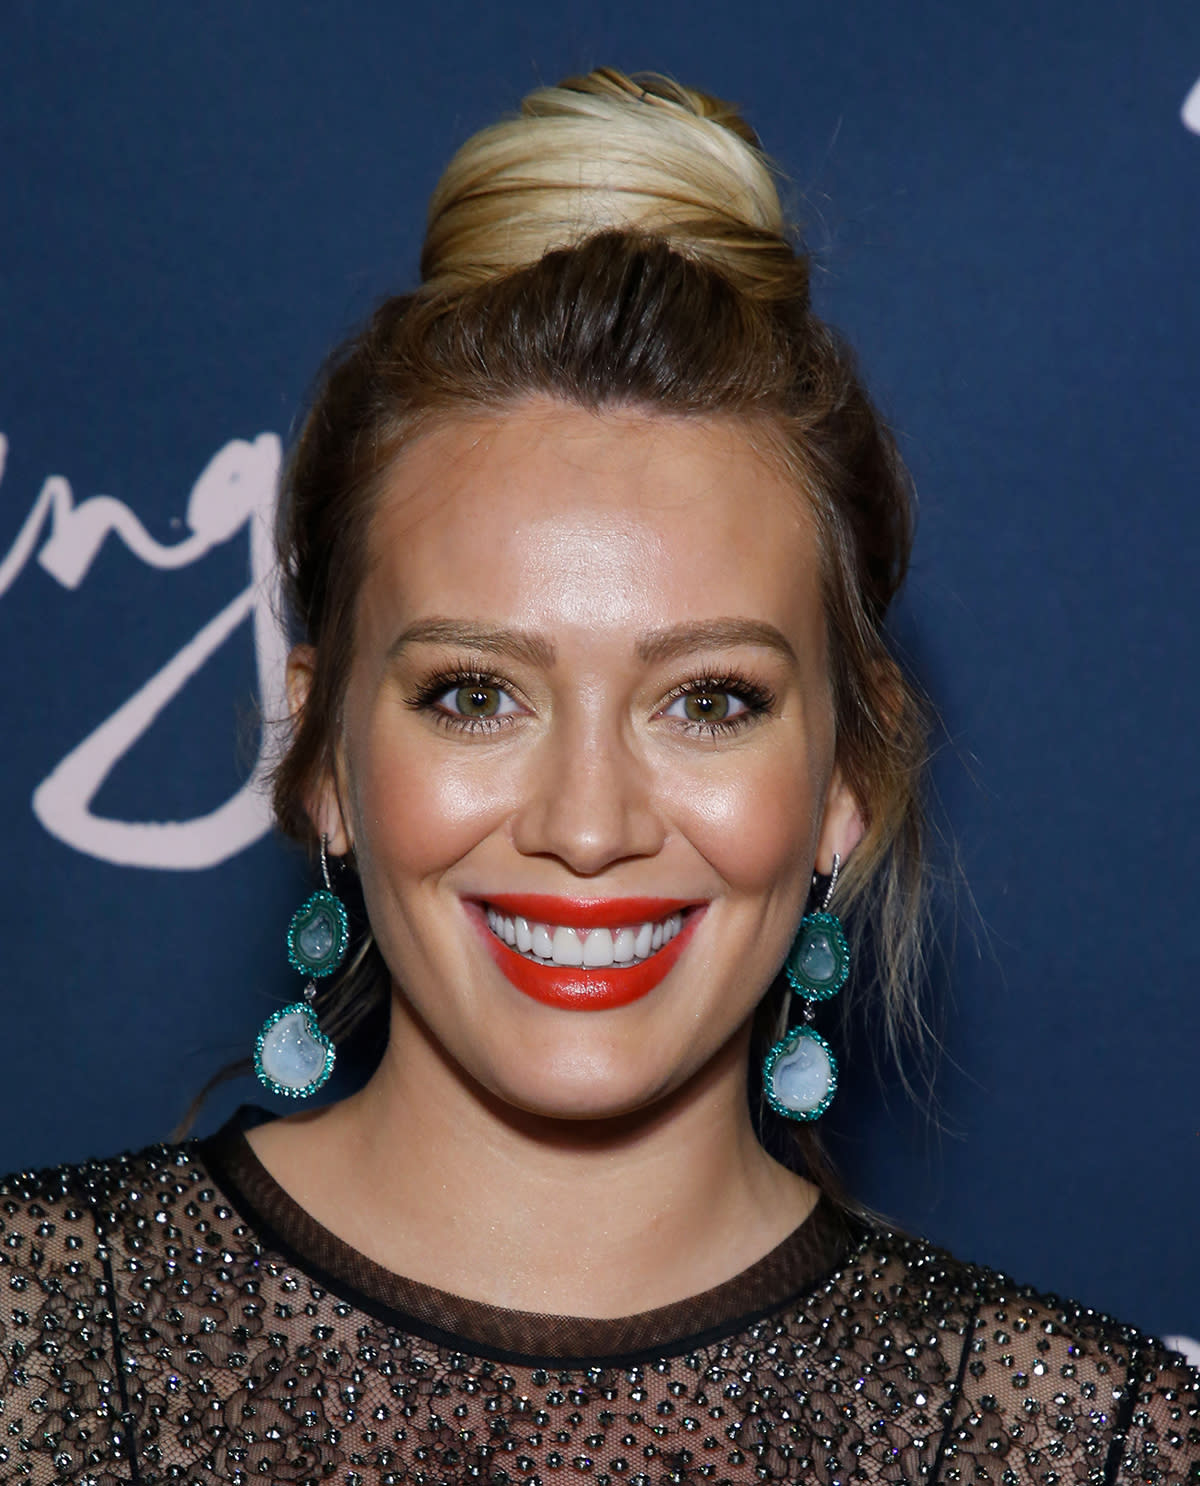 Hilary Duff Is Oddly Unrecognizable With This New Hair Color